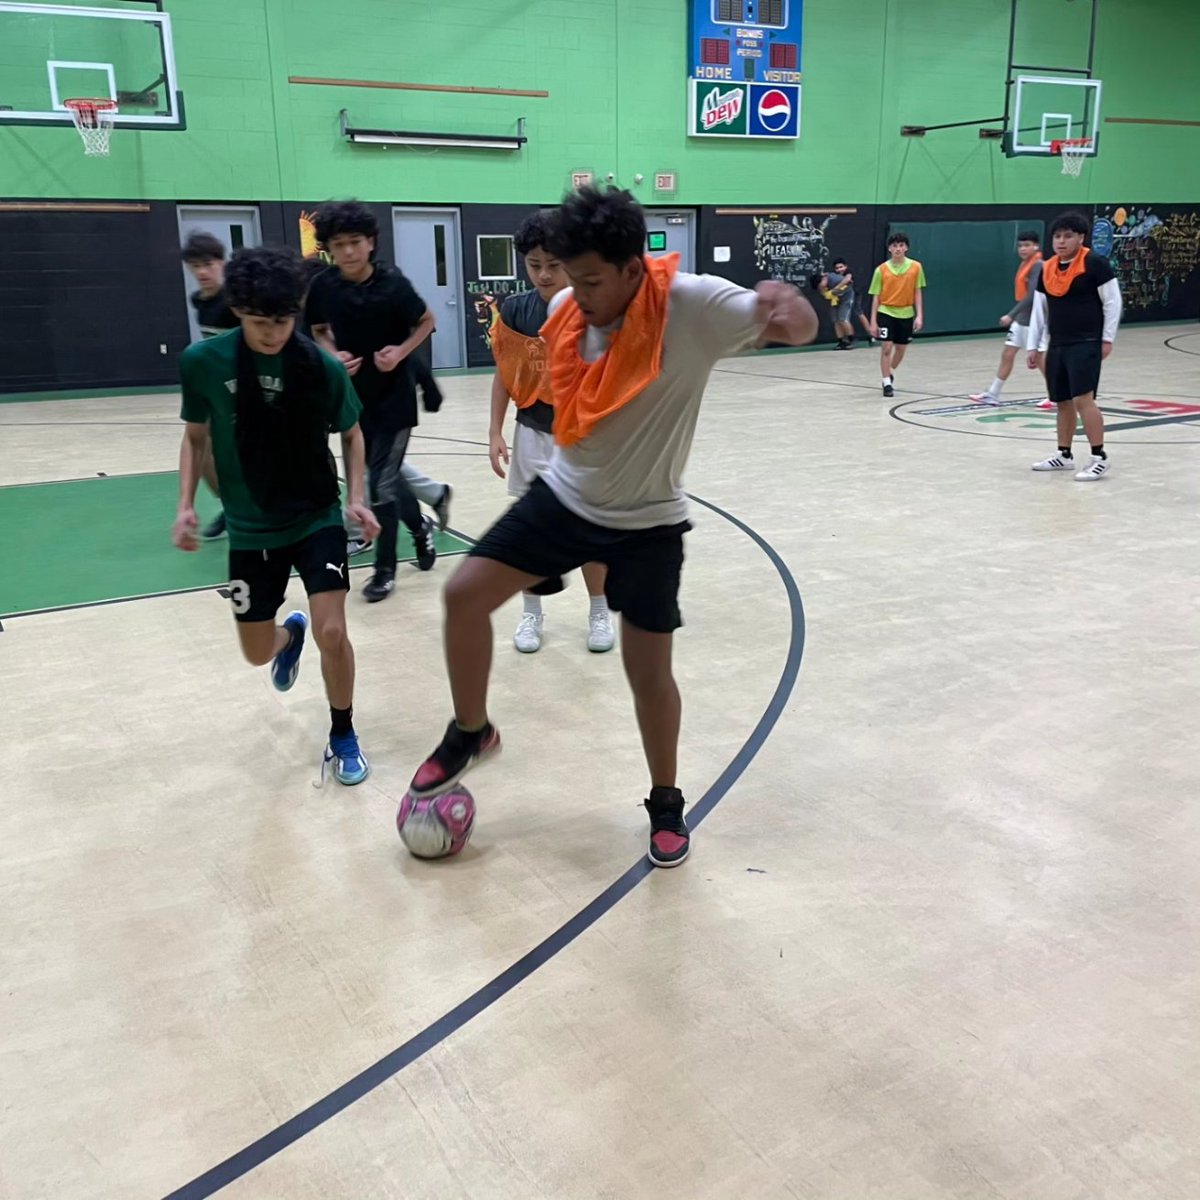 A few pictures from PAL's Indoor Sports Program at FLC in Wyandanch. 
The kids are having a great time playing soccer together. ⚽️ 
#WeArePAL #indoorsoccer